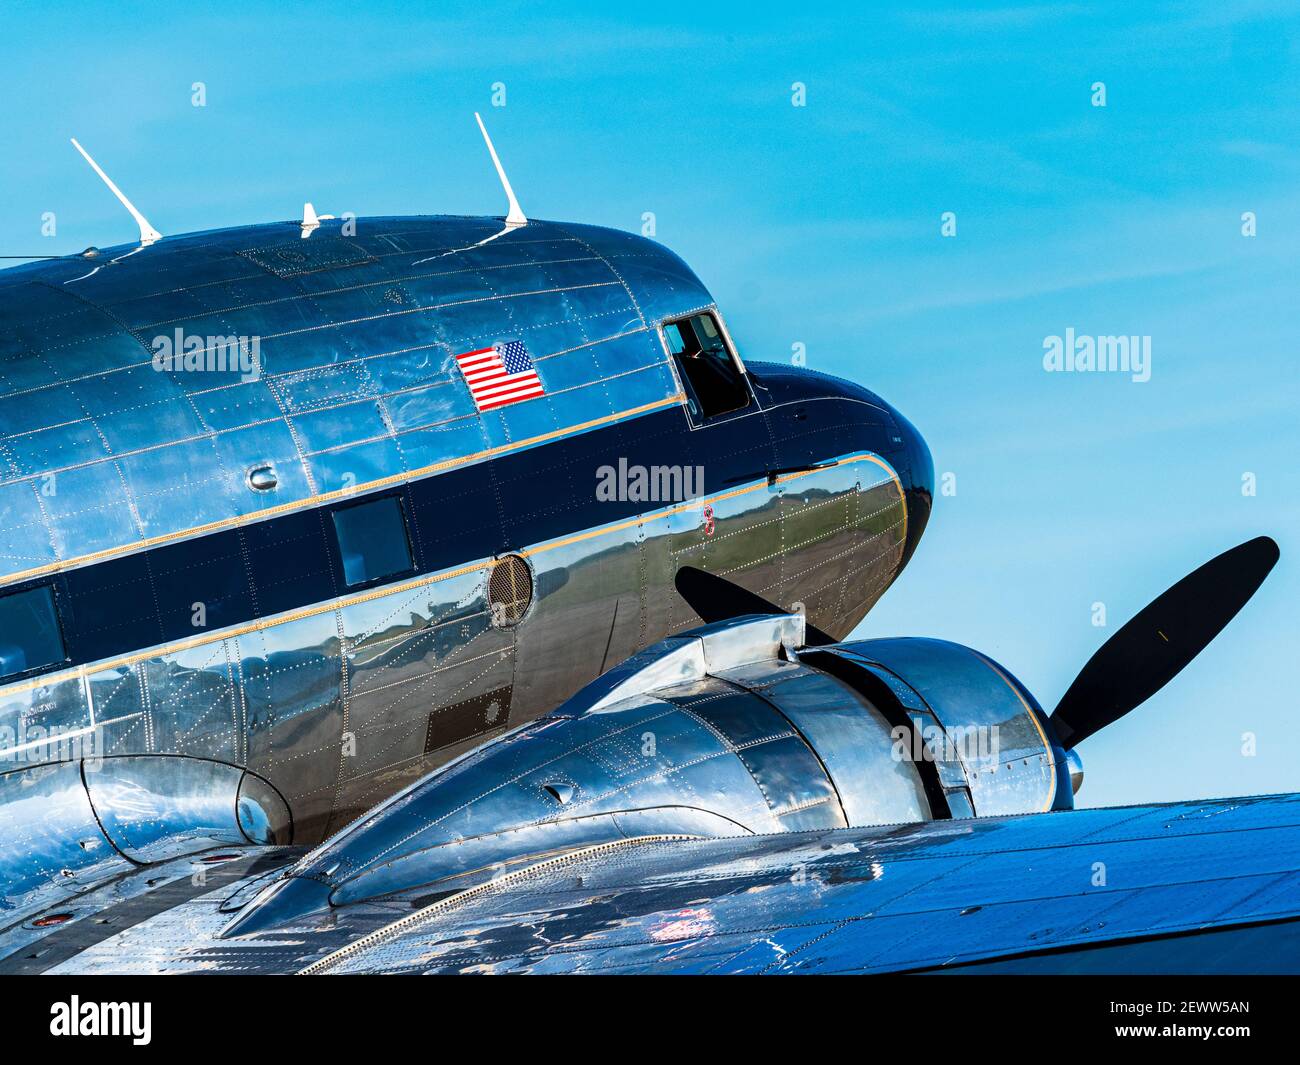 Douglas DC-3 N341A  - C41A designation - delivered 1939 to the US Army Air Command as VIP Transports for senior staff and VIPs. Douglas DC-3 Dakota. Stock Photo